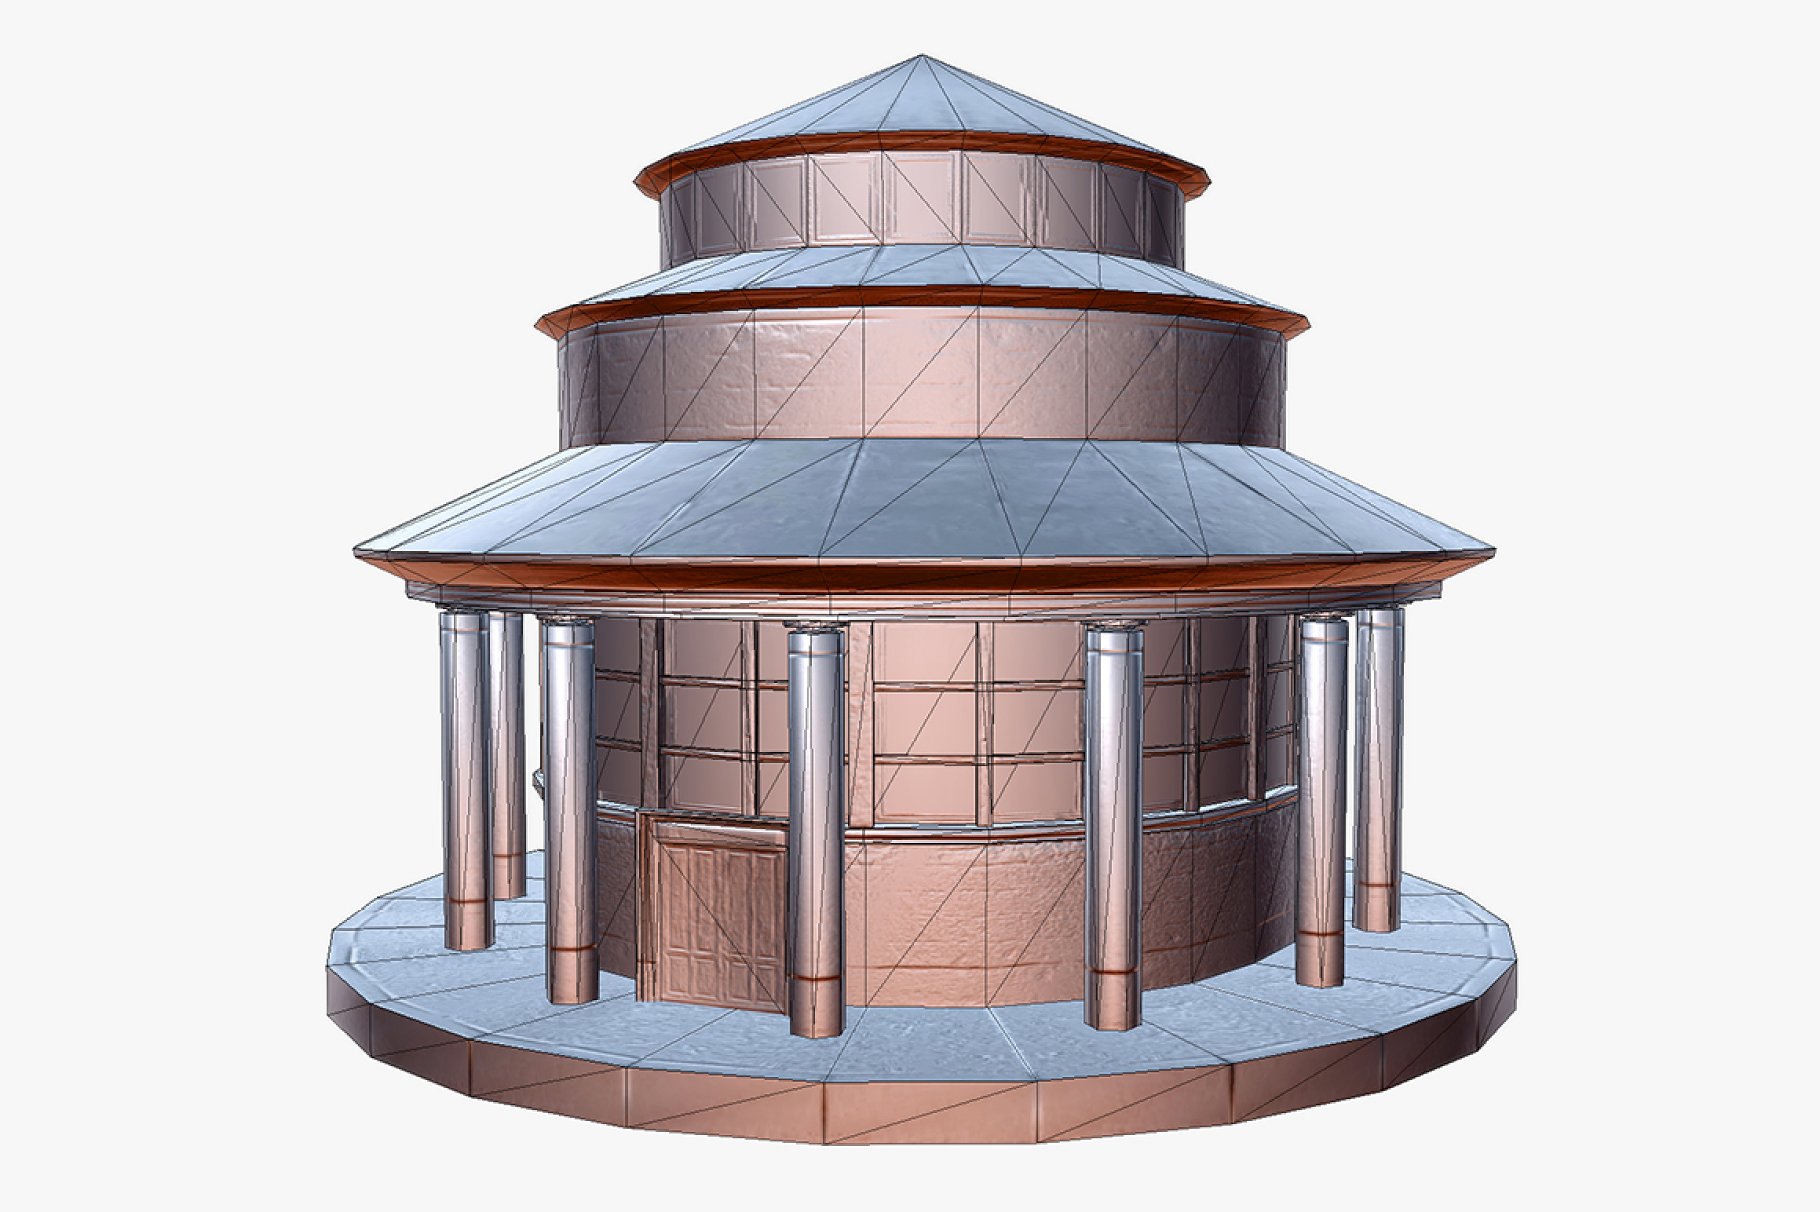 Image of polygons of a round house.